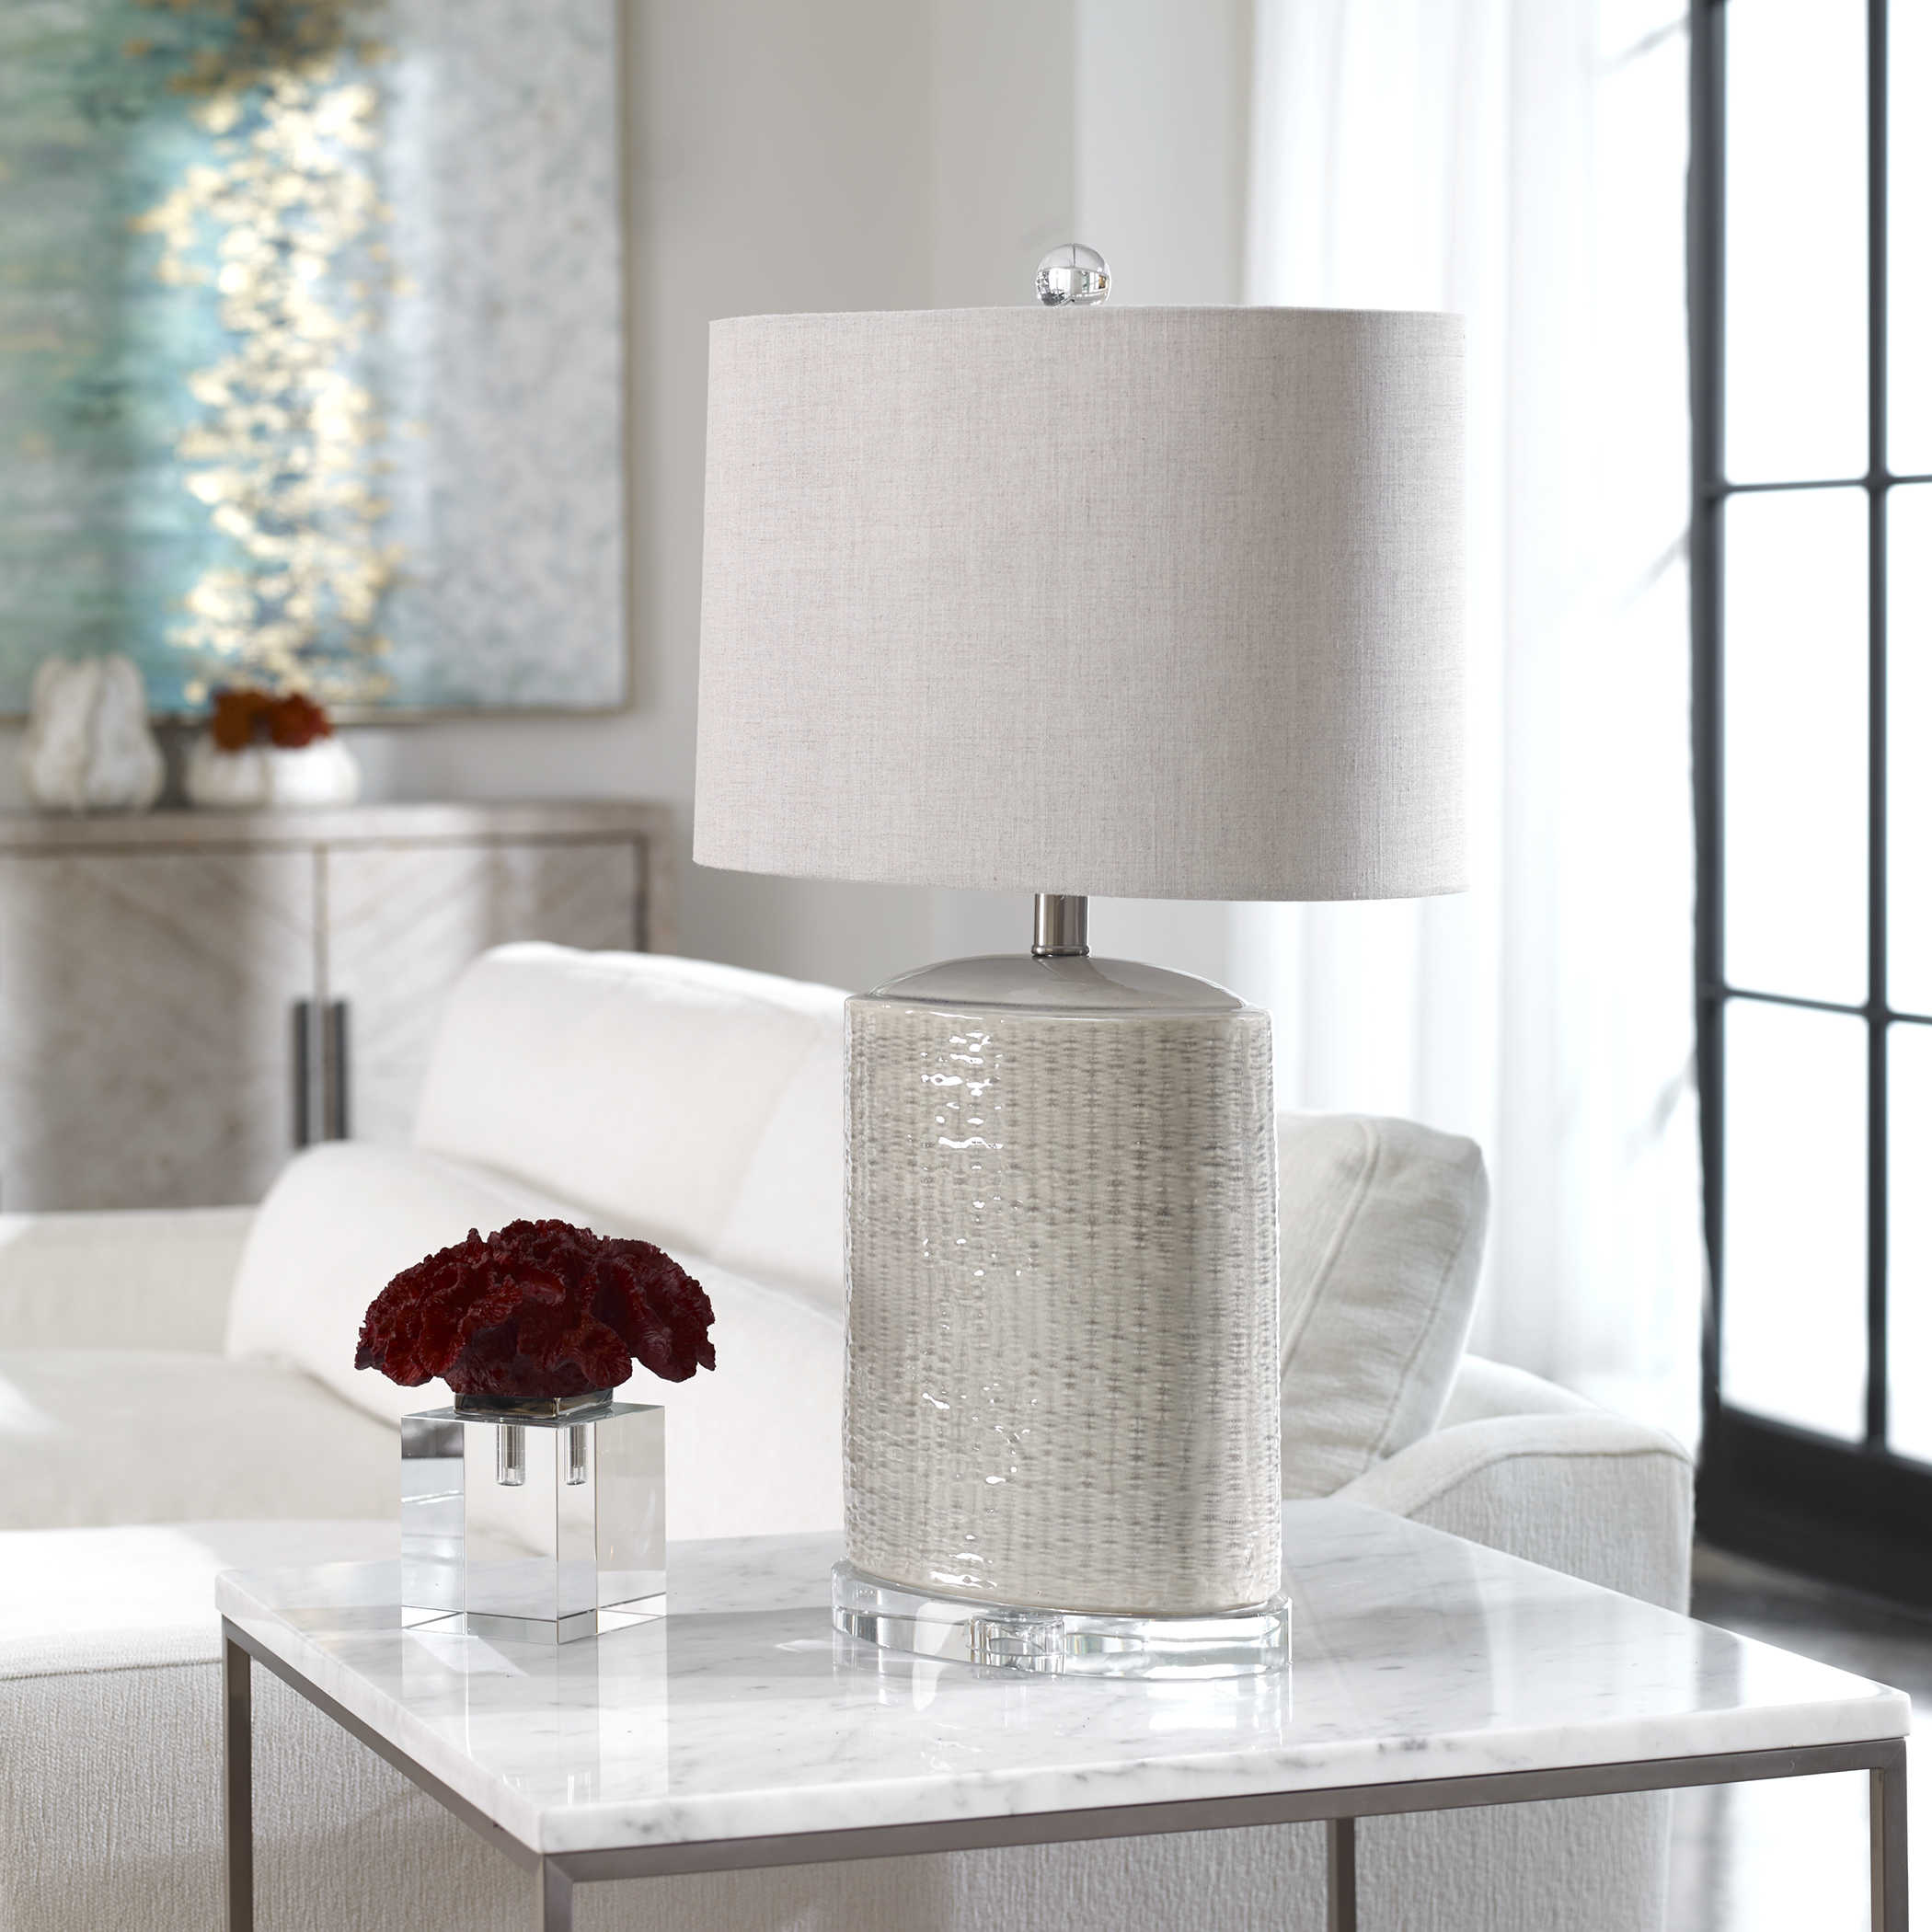 Lamp, Modica - Danshire Market and Design , light taupe gray ceramic lamp , 26" HIGH, light taupe-gray glaze, with brushed nickel plated accents and crystal details. The oval hardback drum shade is a beige linen fabric